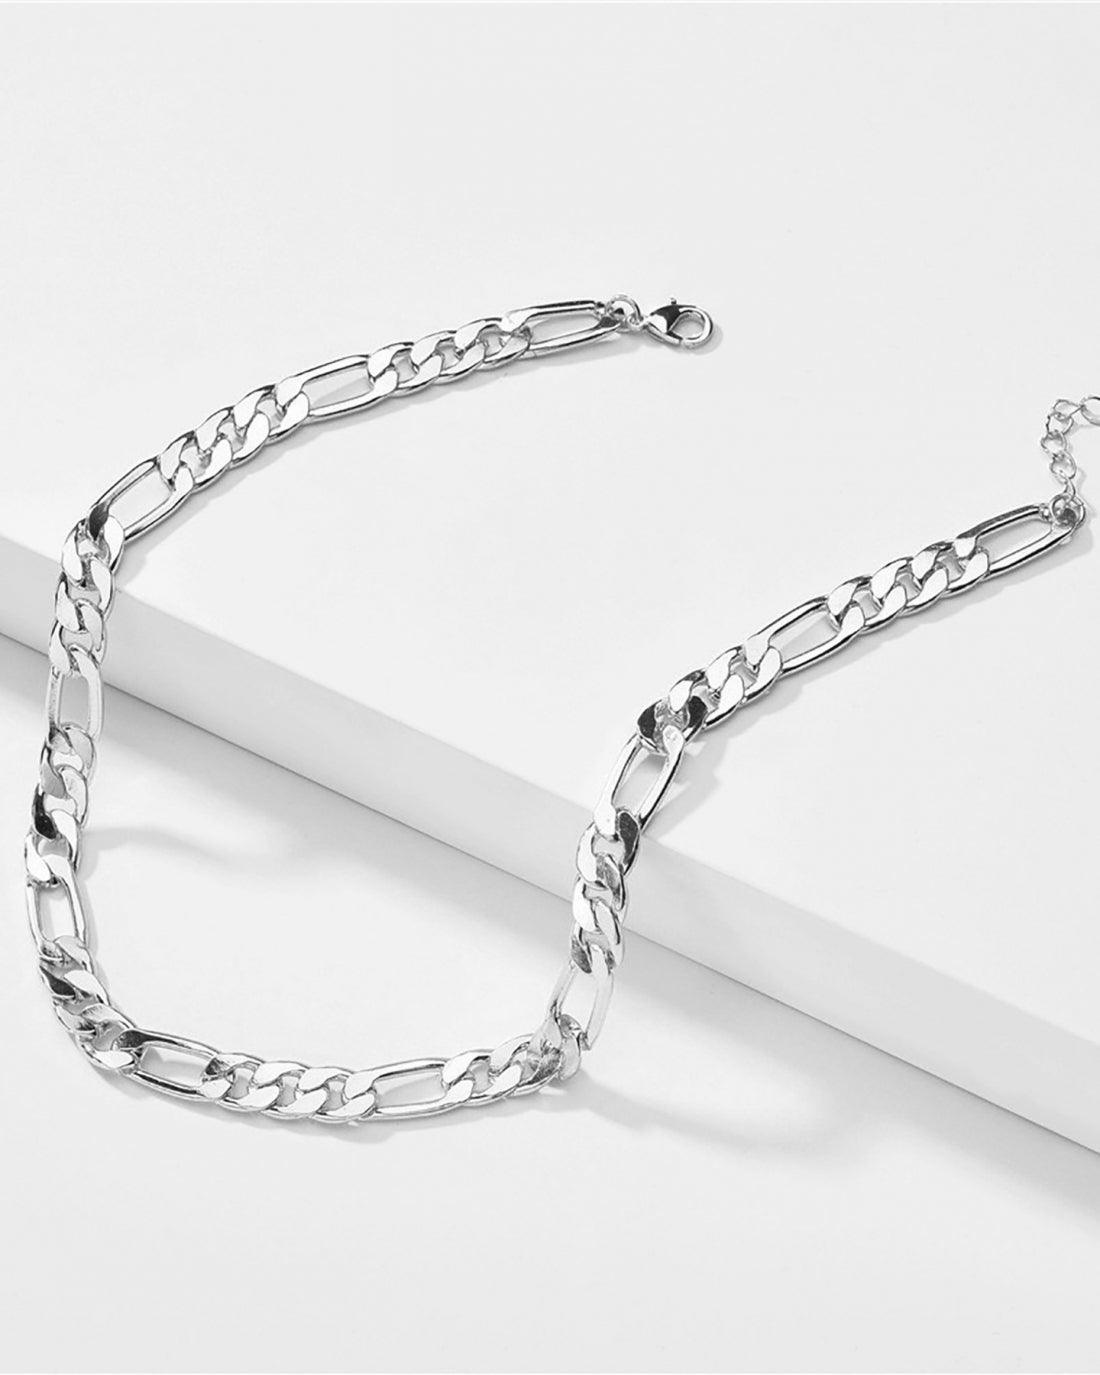 Buy Now 100 DEGREE CHAIN Online